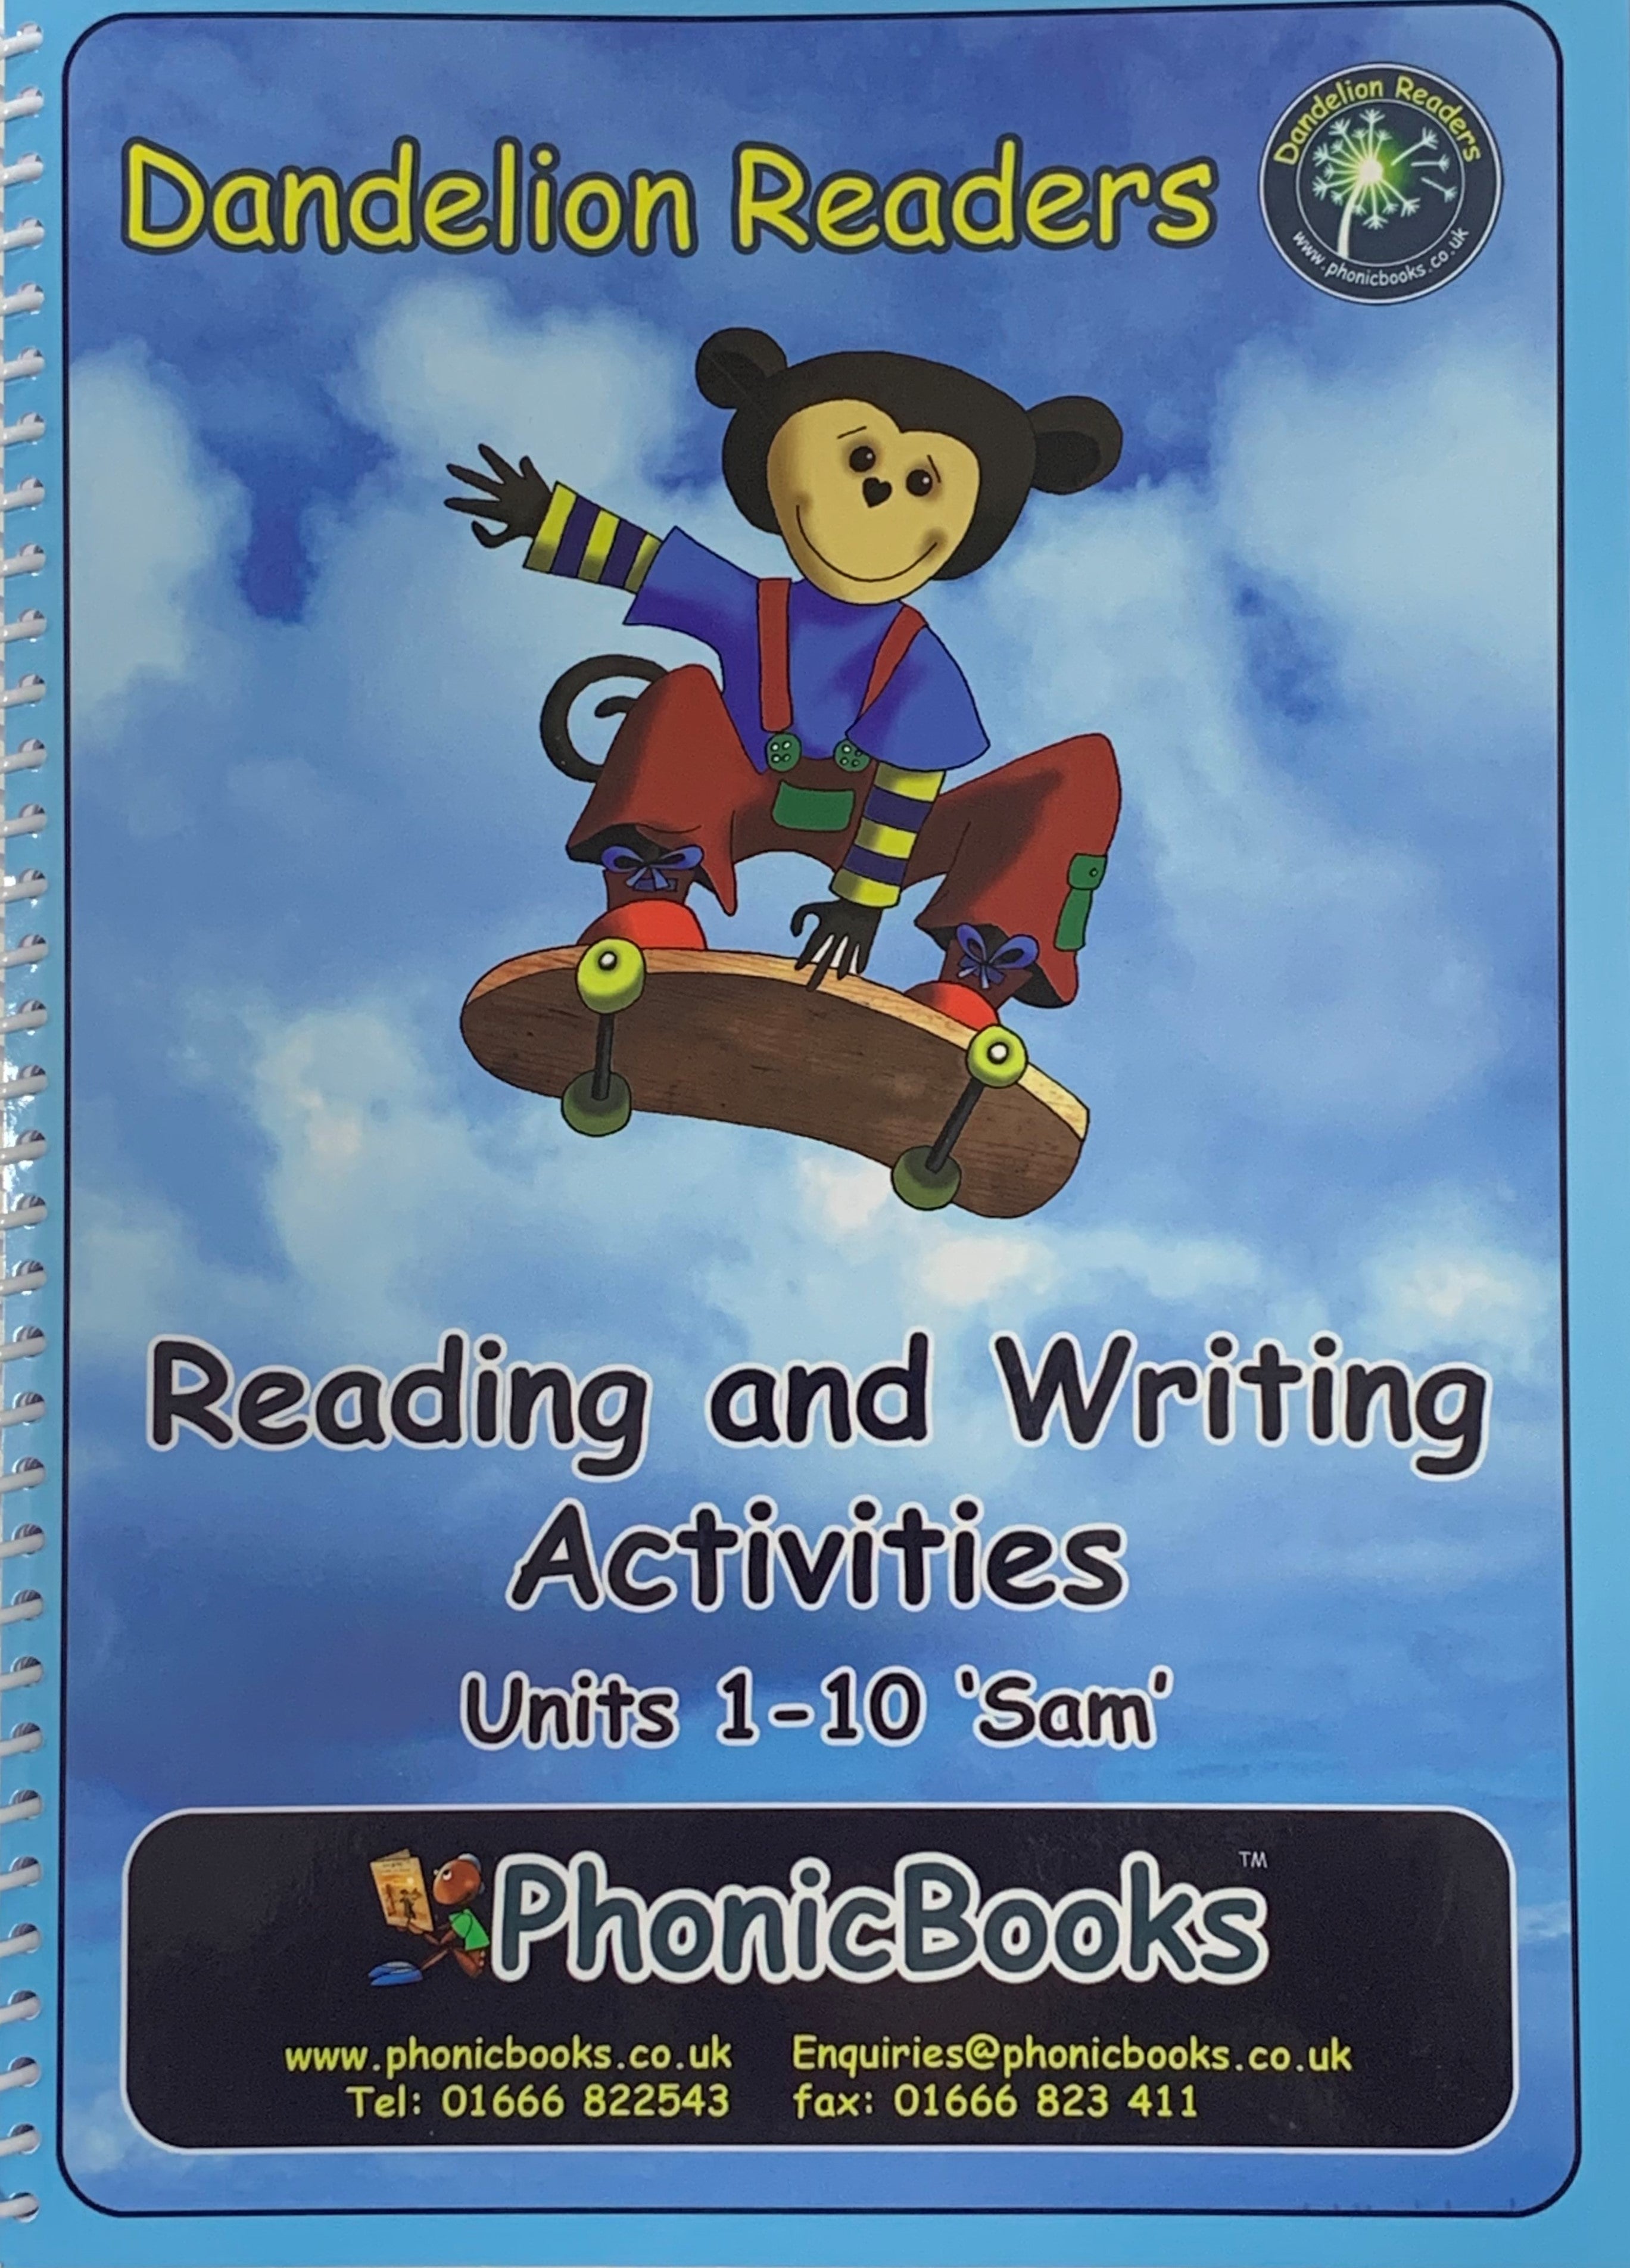 Dandelion Reading and Writing Activities units 1-10 Sam